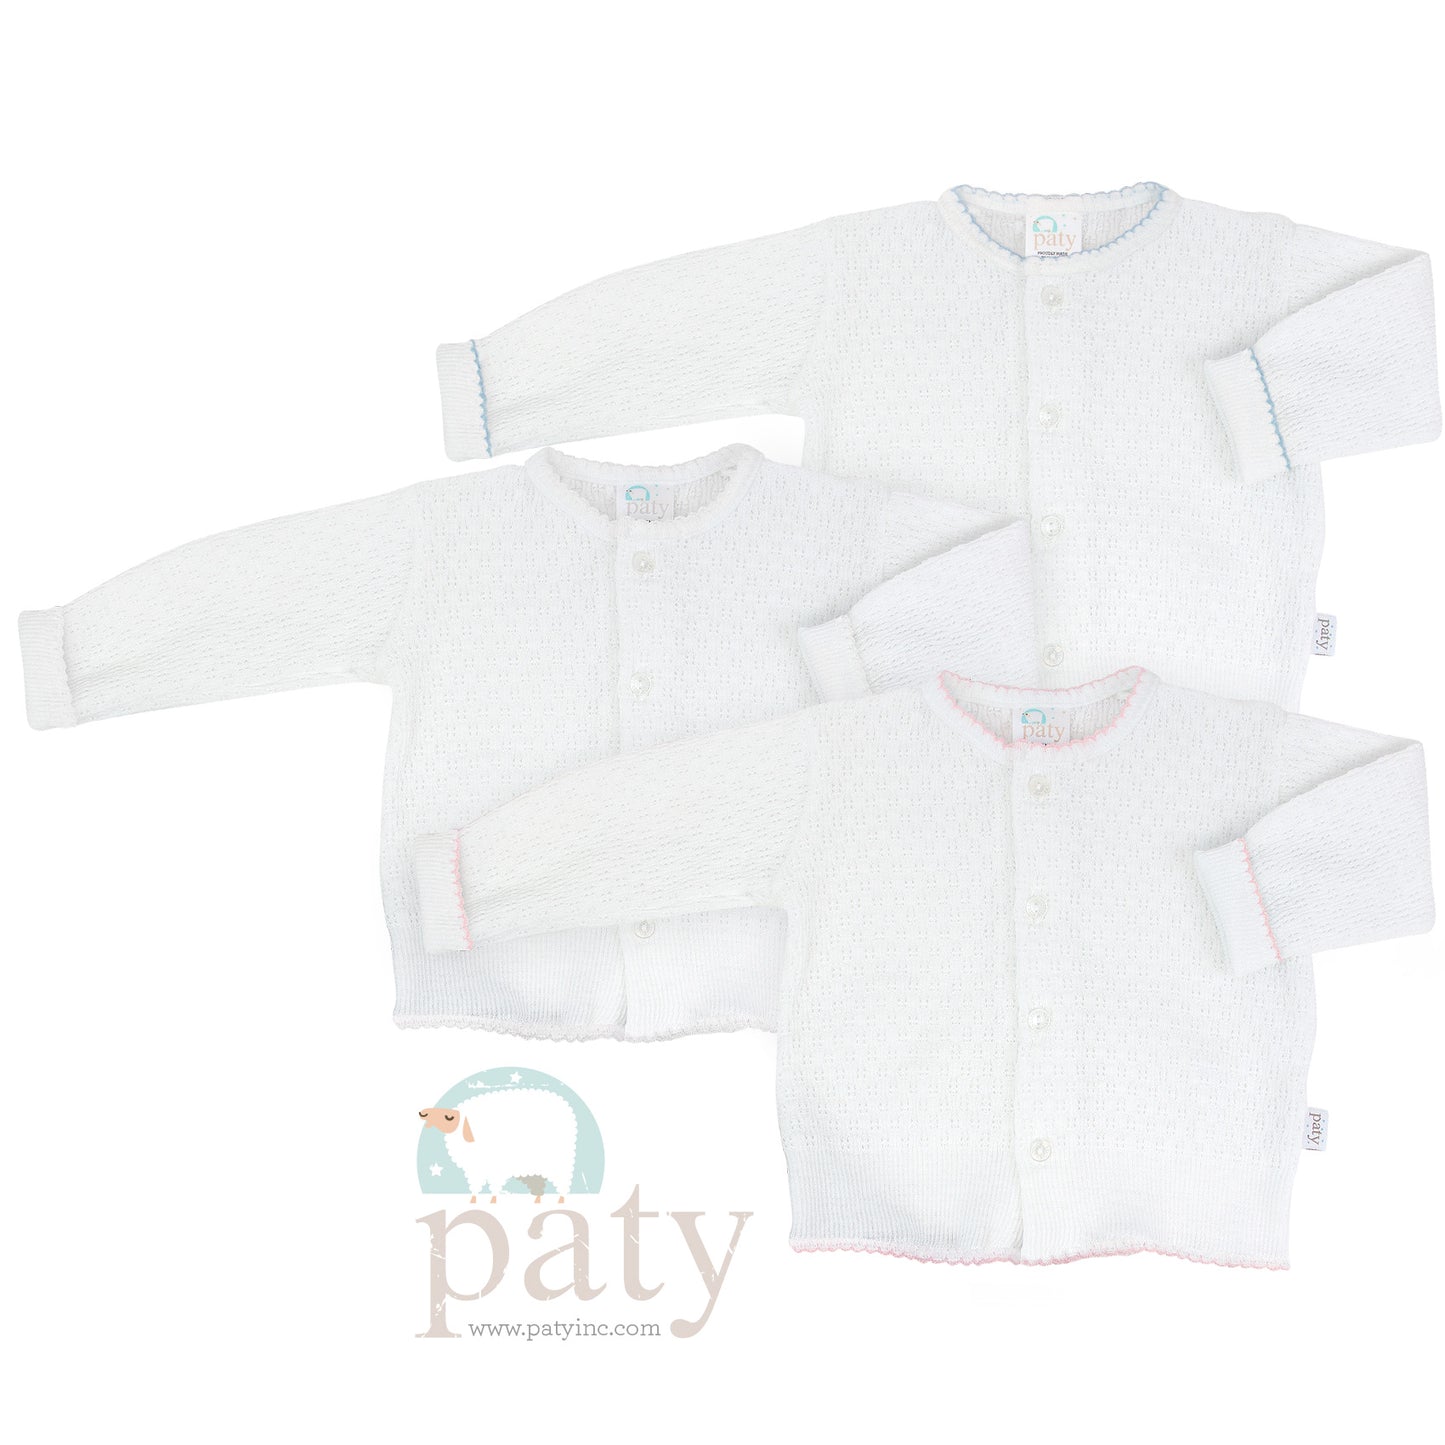 Paty Knit LS Button Up White Cardigan Sweater with Trim Options